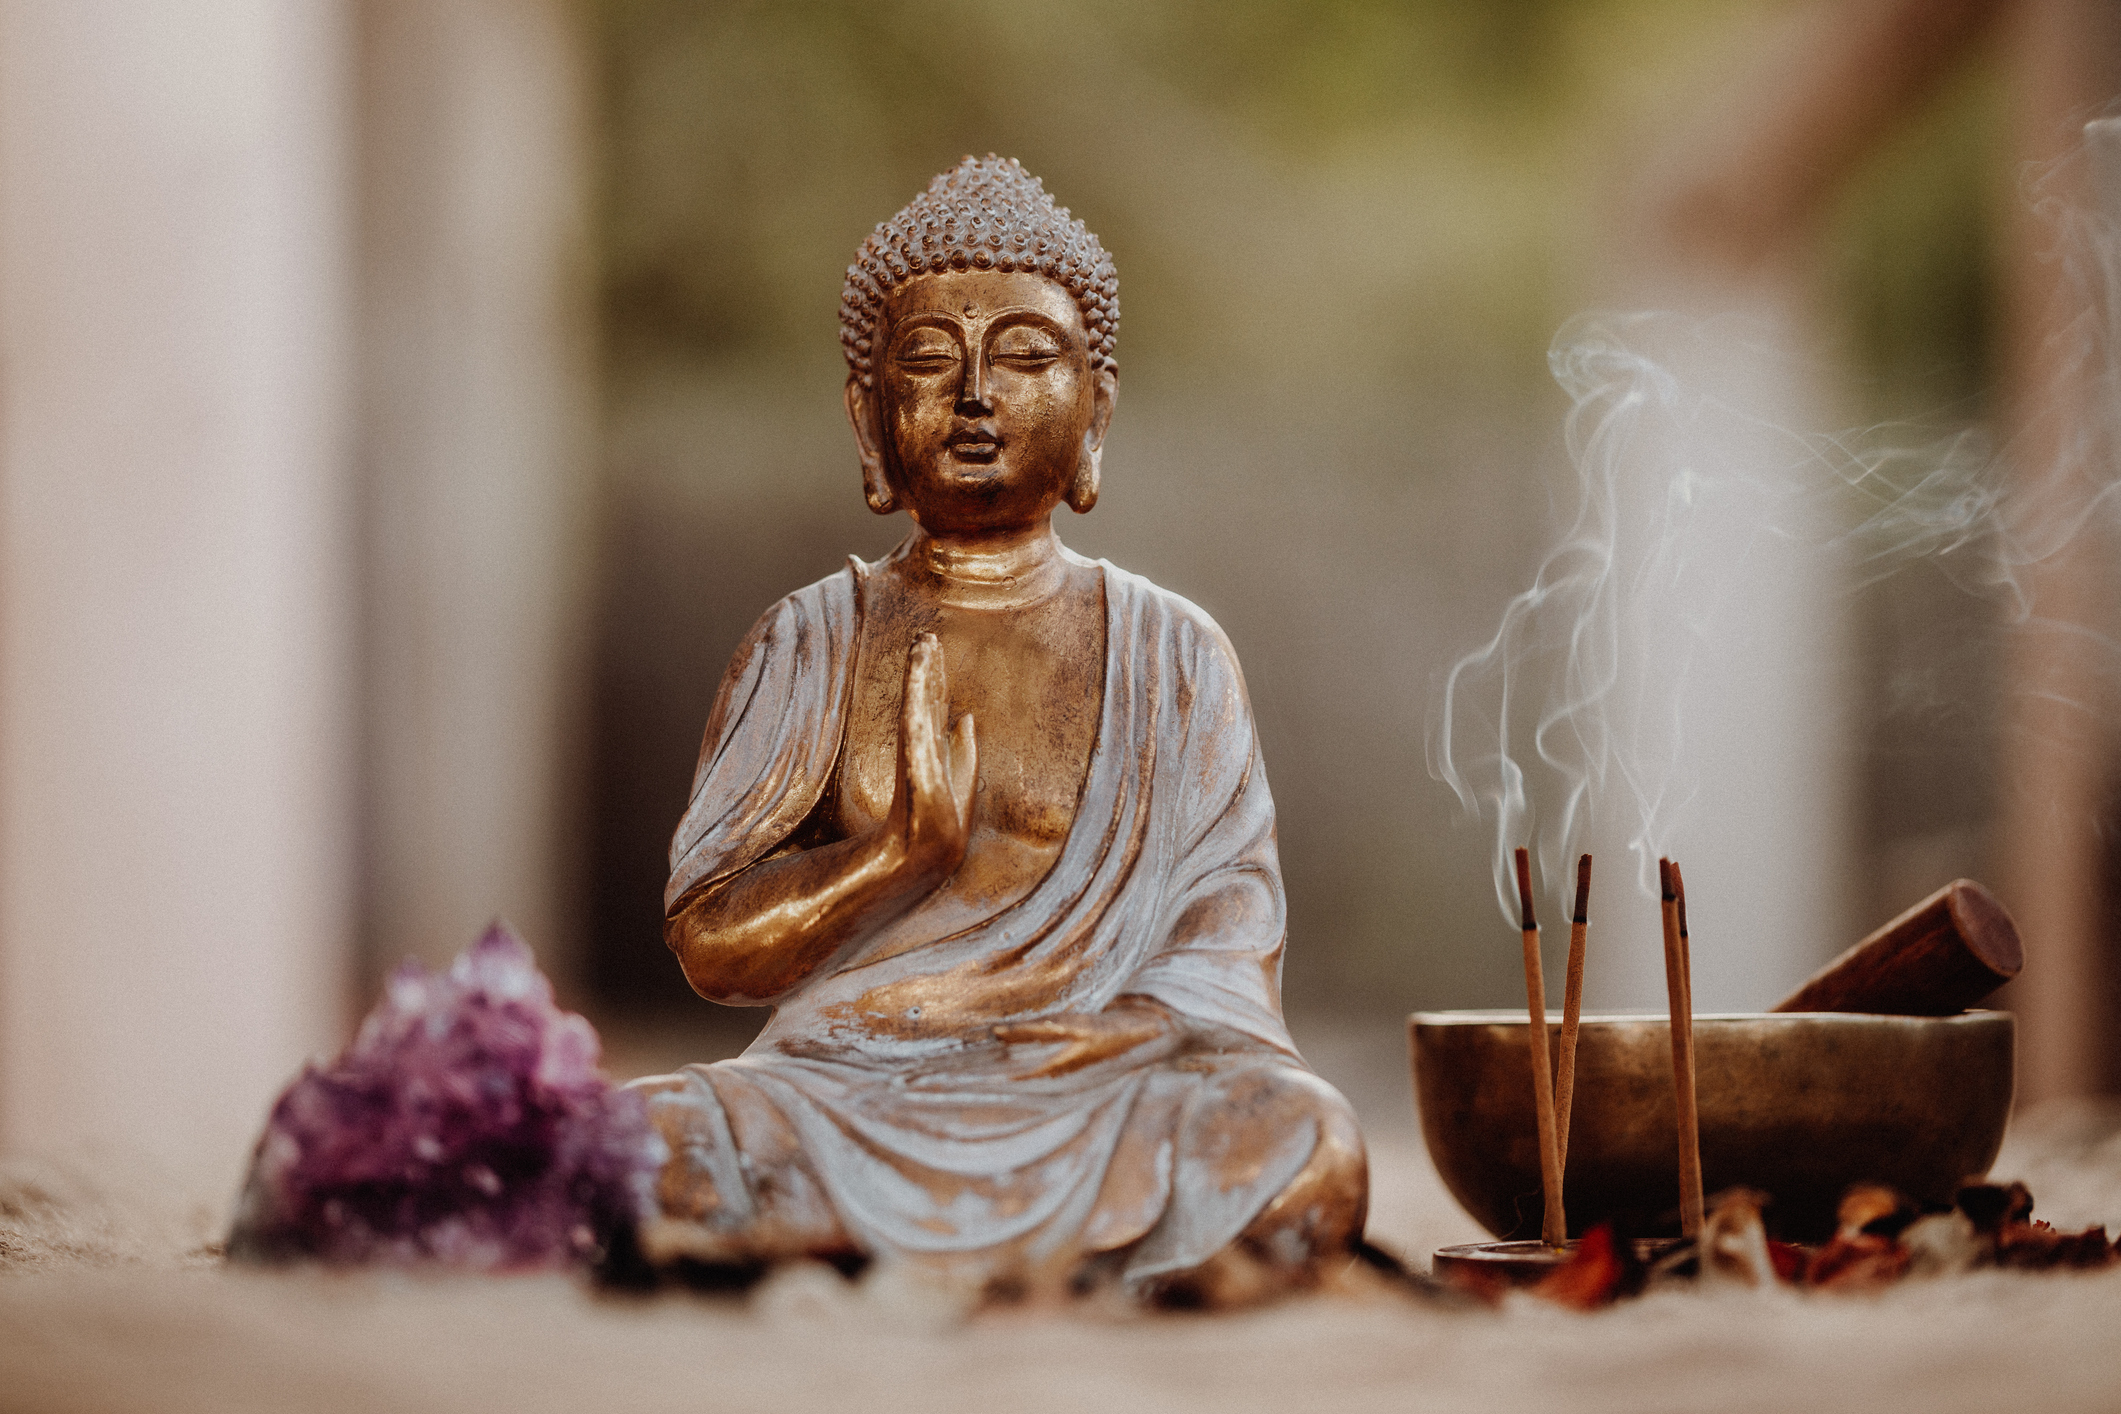 Buddha statue in a meditative pose, with incense burning in a bowl beside it and a cluster of amethyst crystals nearby